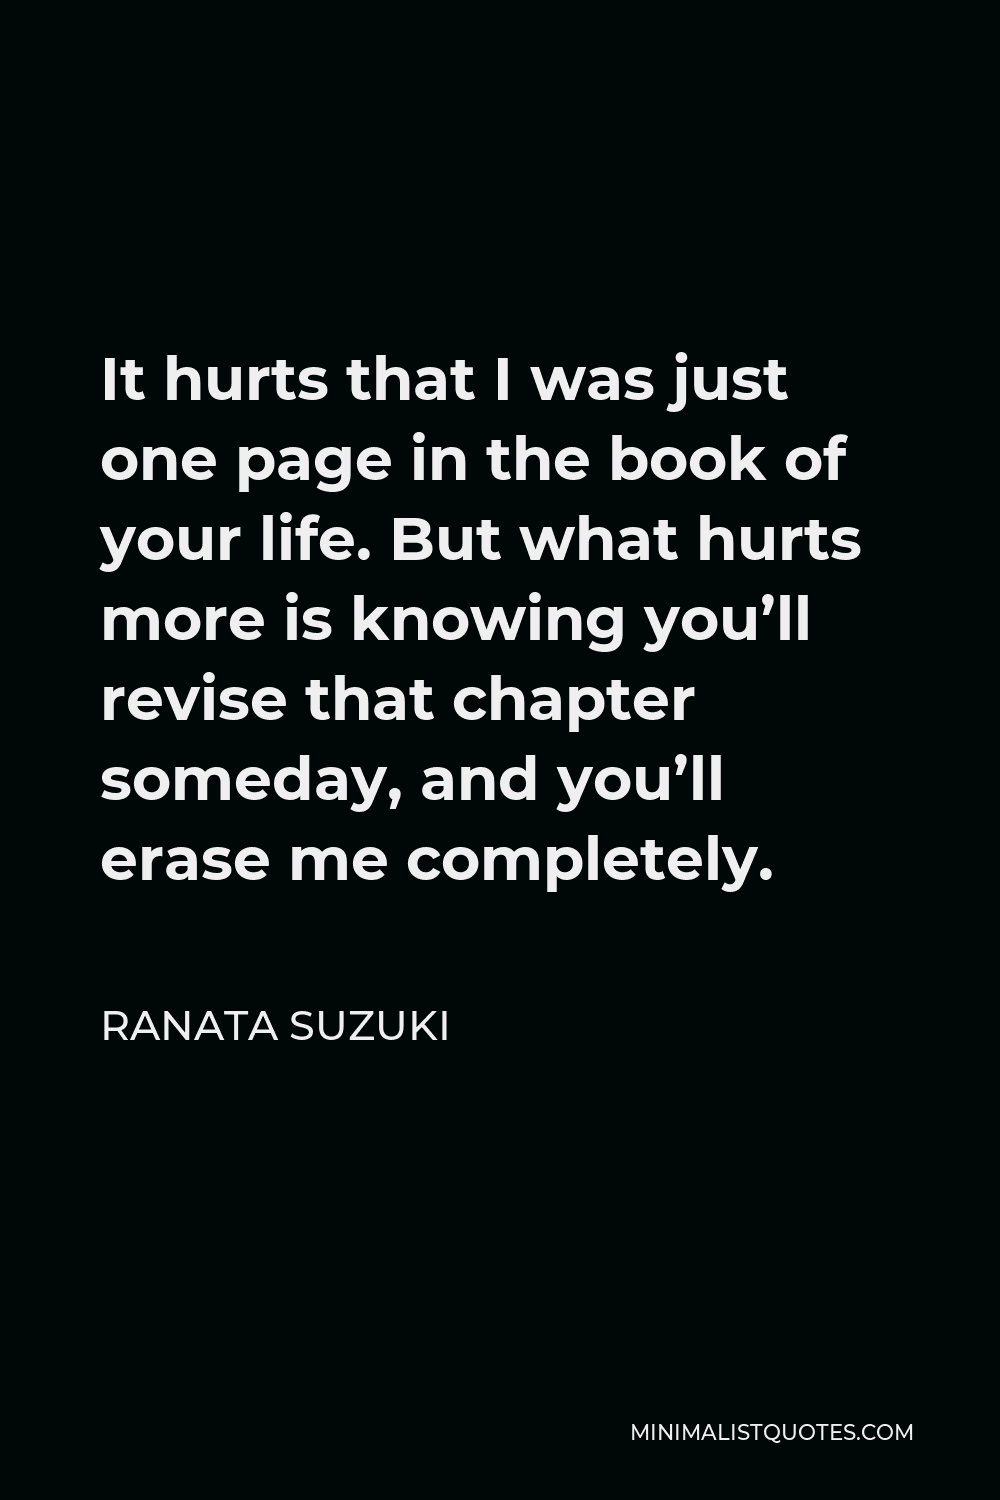 Ranata Suzuki Quote - It hurts that I was just one page in the book of your life. But what hurts more is knowing you’ll revise that chapter someday, and you’ll erase me completely.